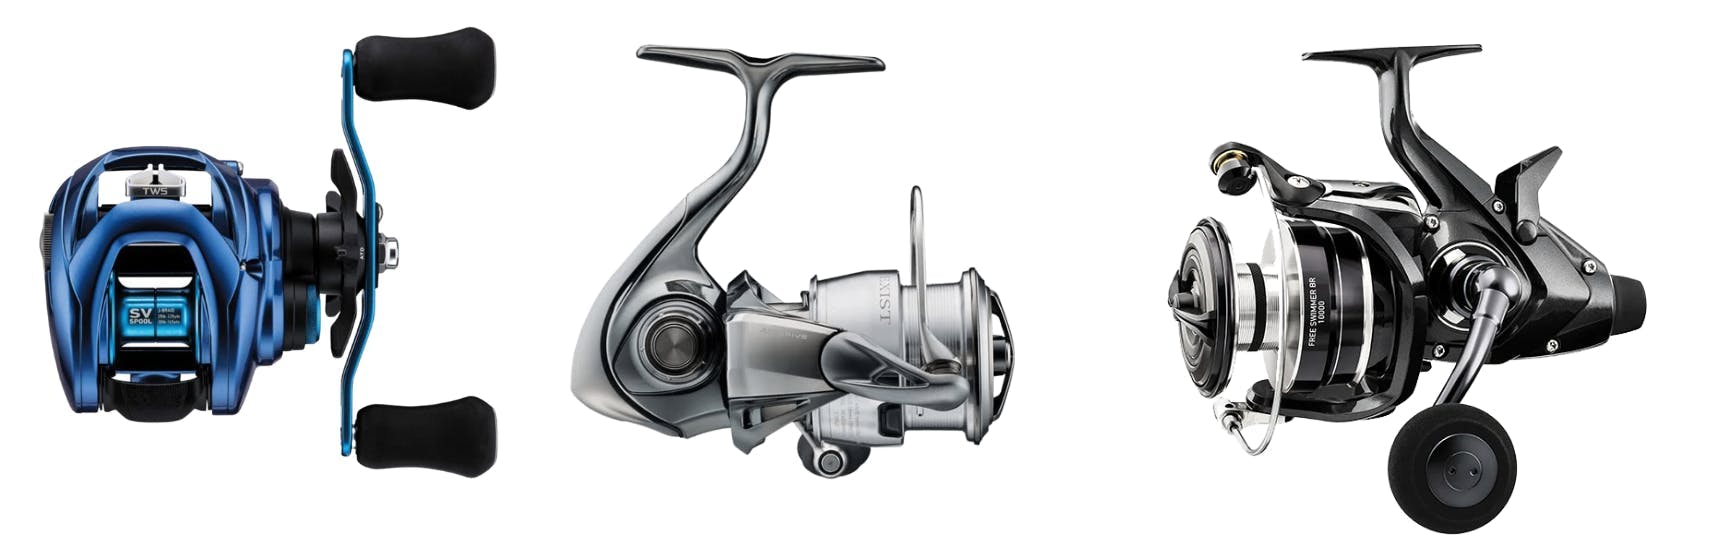 Three of Daiwa's new reels in a row—Exist 2022, Free Swimmer 2022, and Coastal 70 2022.